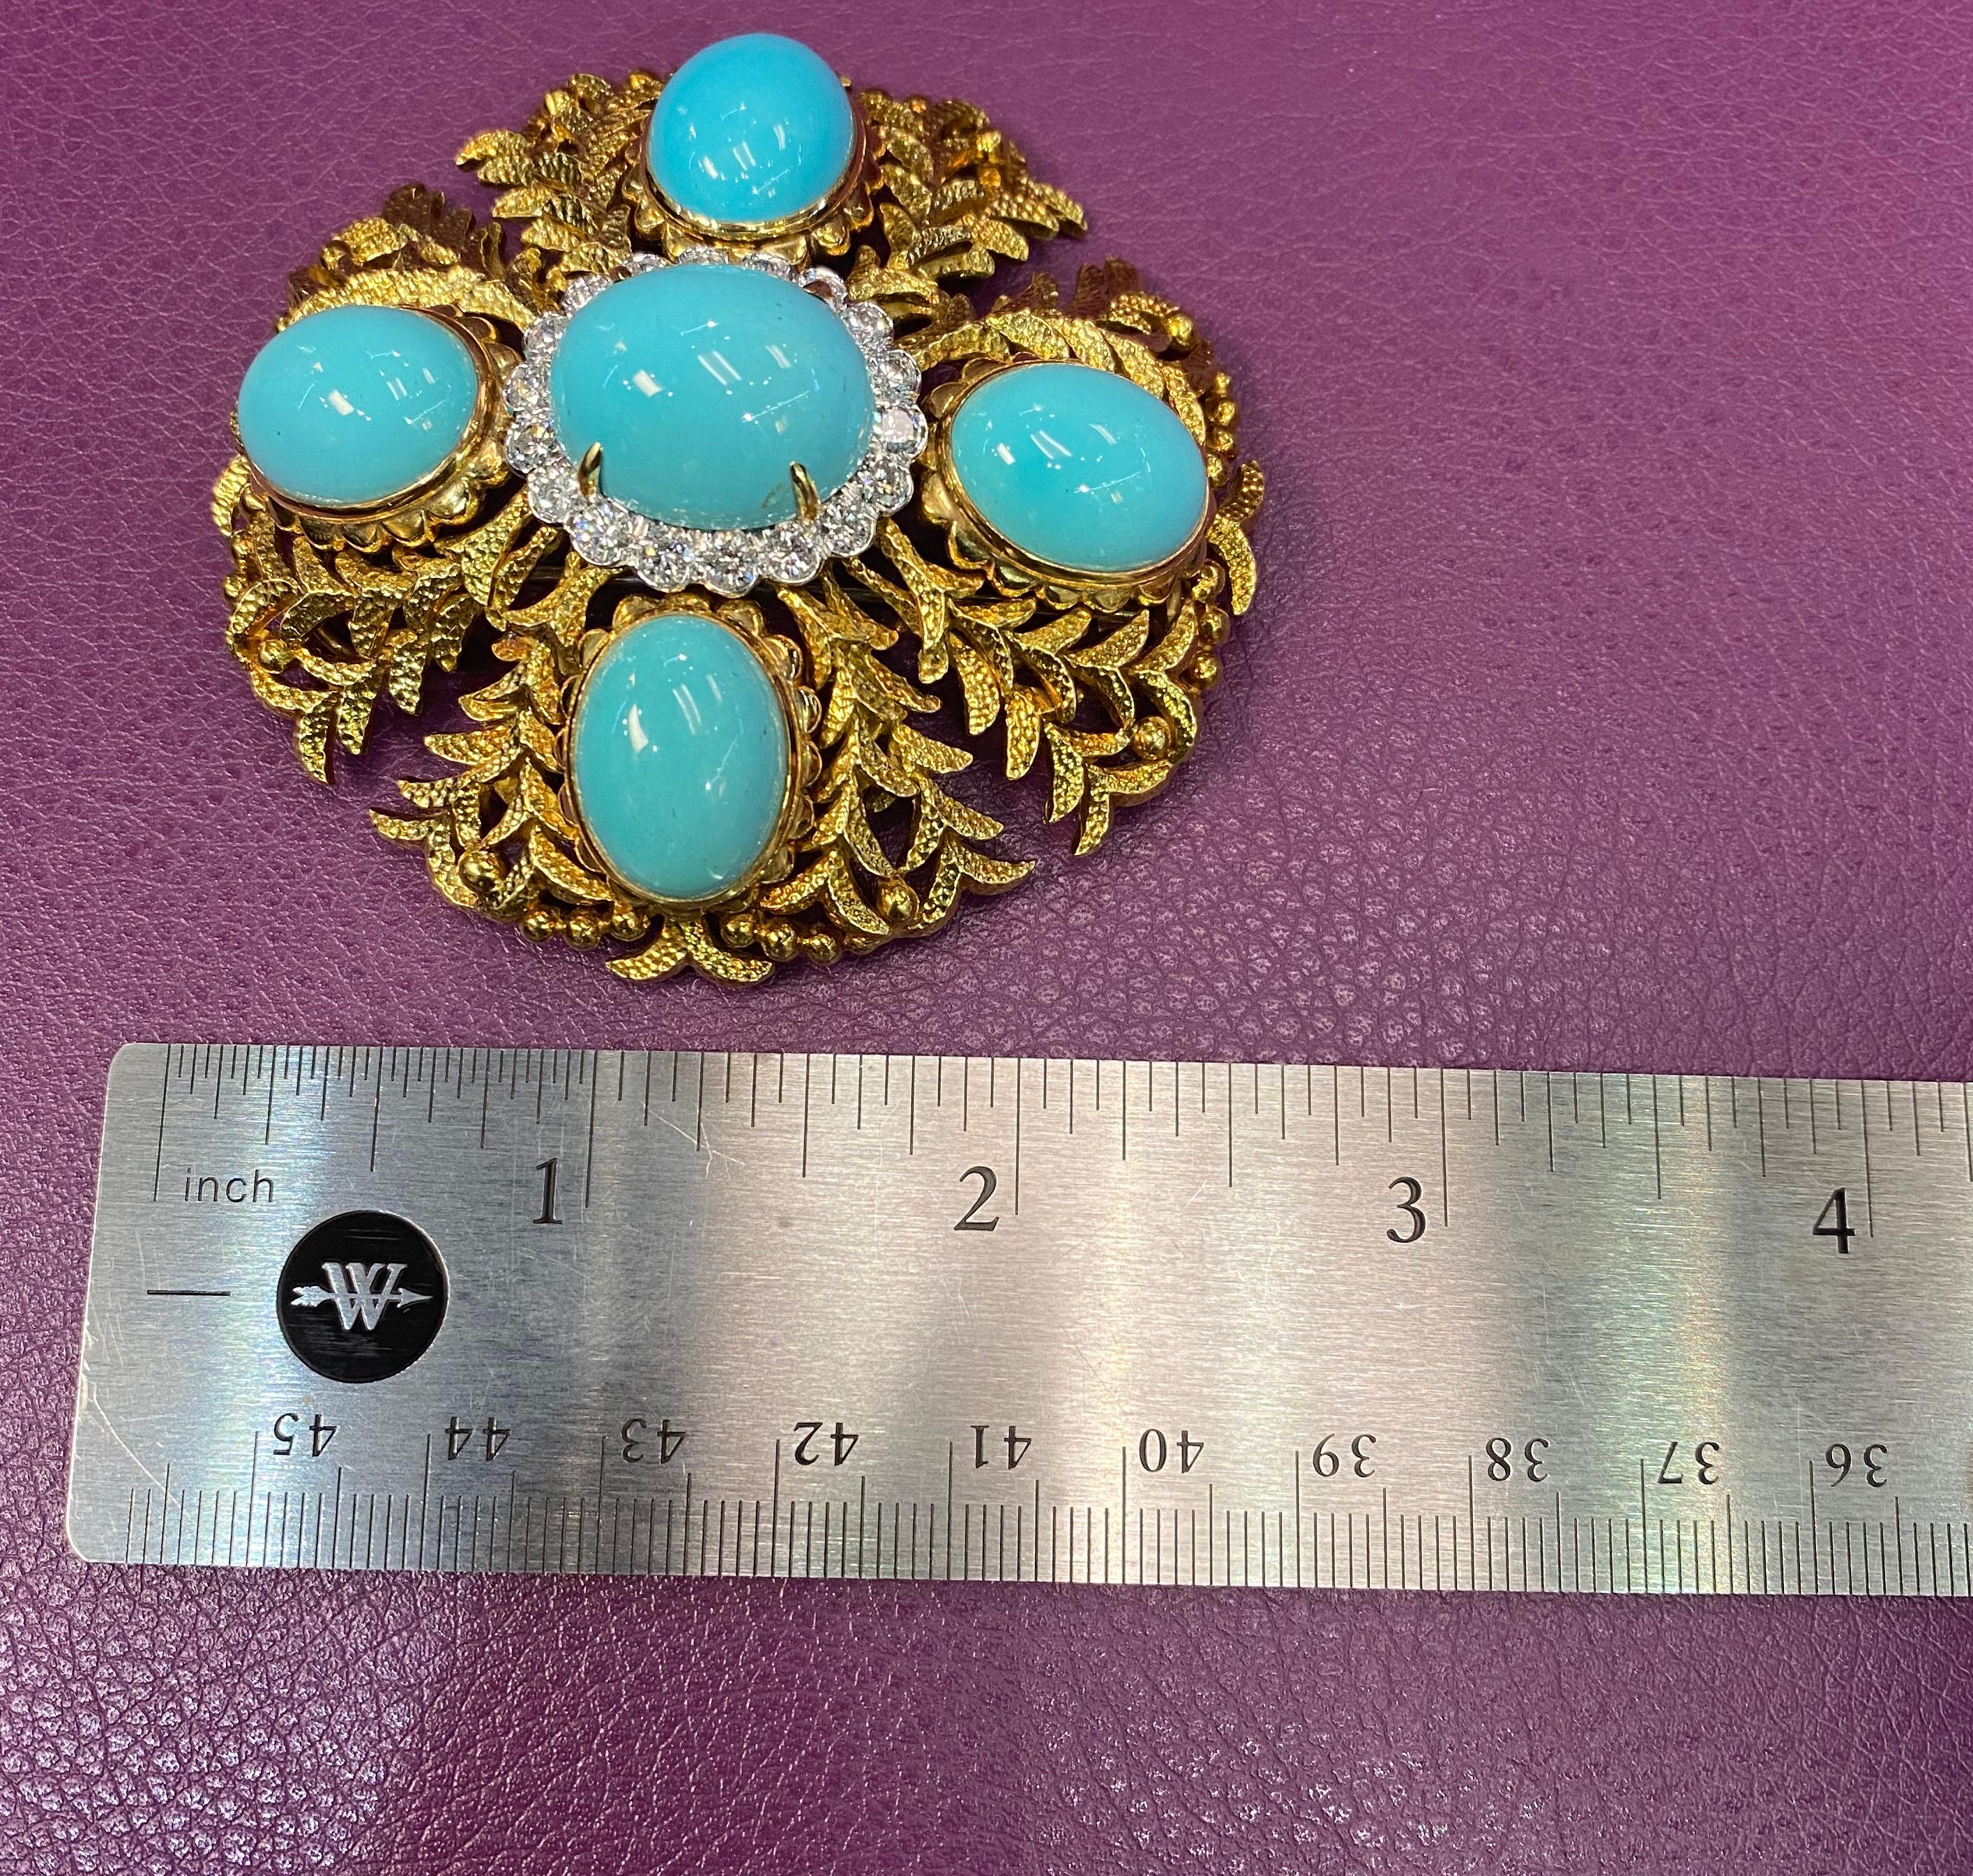 Large Size David Webb Cabochon Turquoise & Diamond Brooch For Sale 2